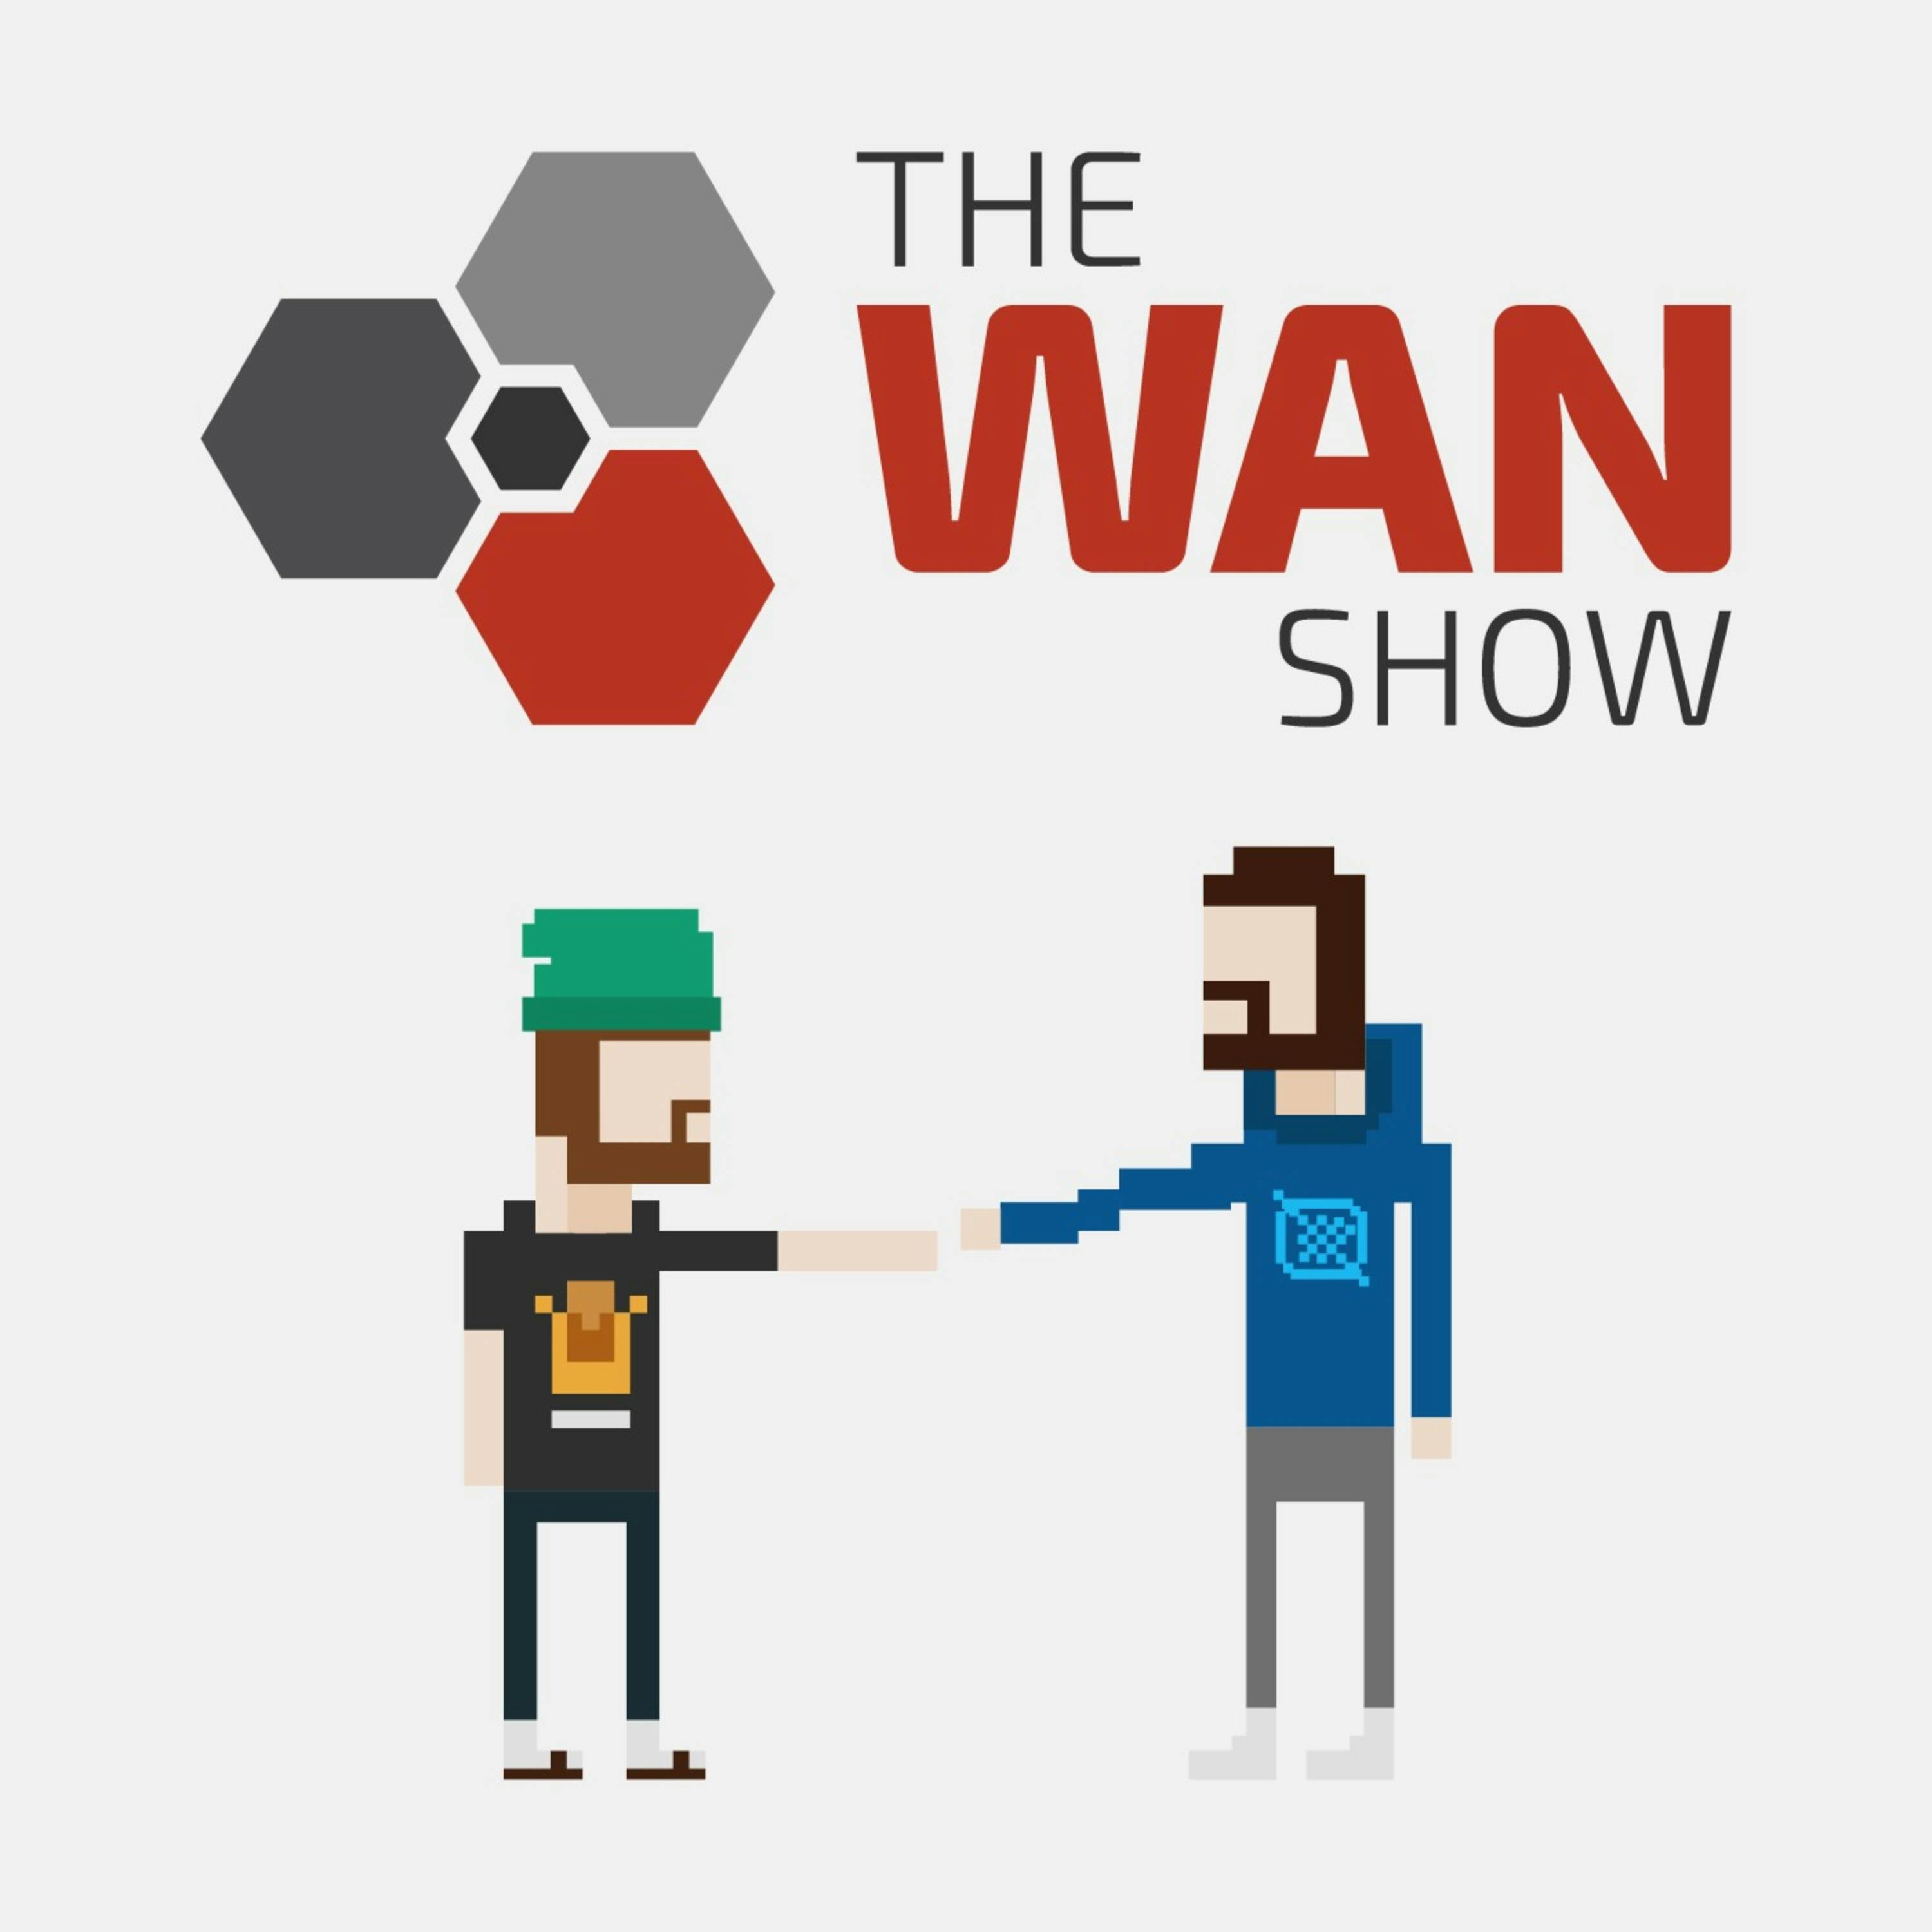 I LOVE These Ads! - WAN Show May 7, 2021